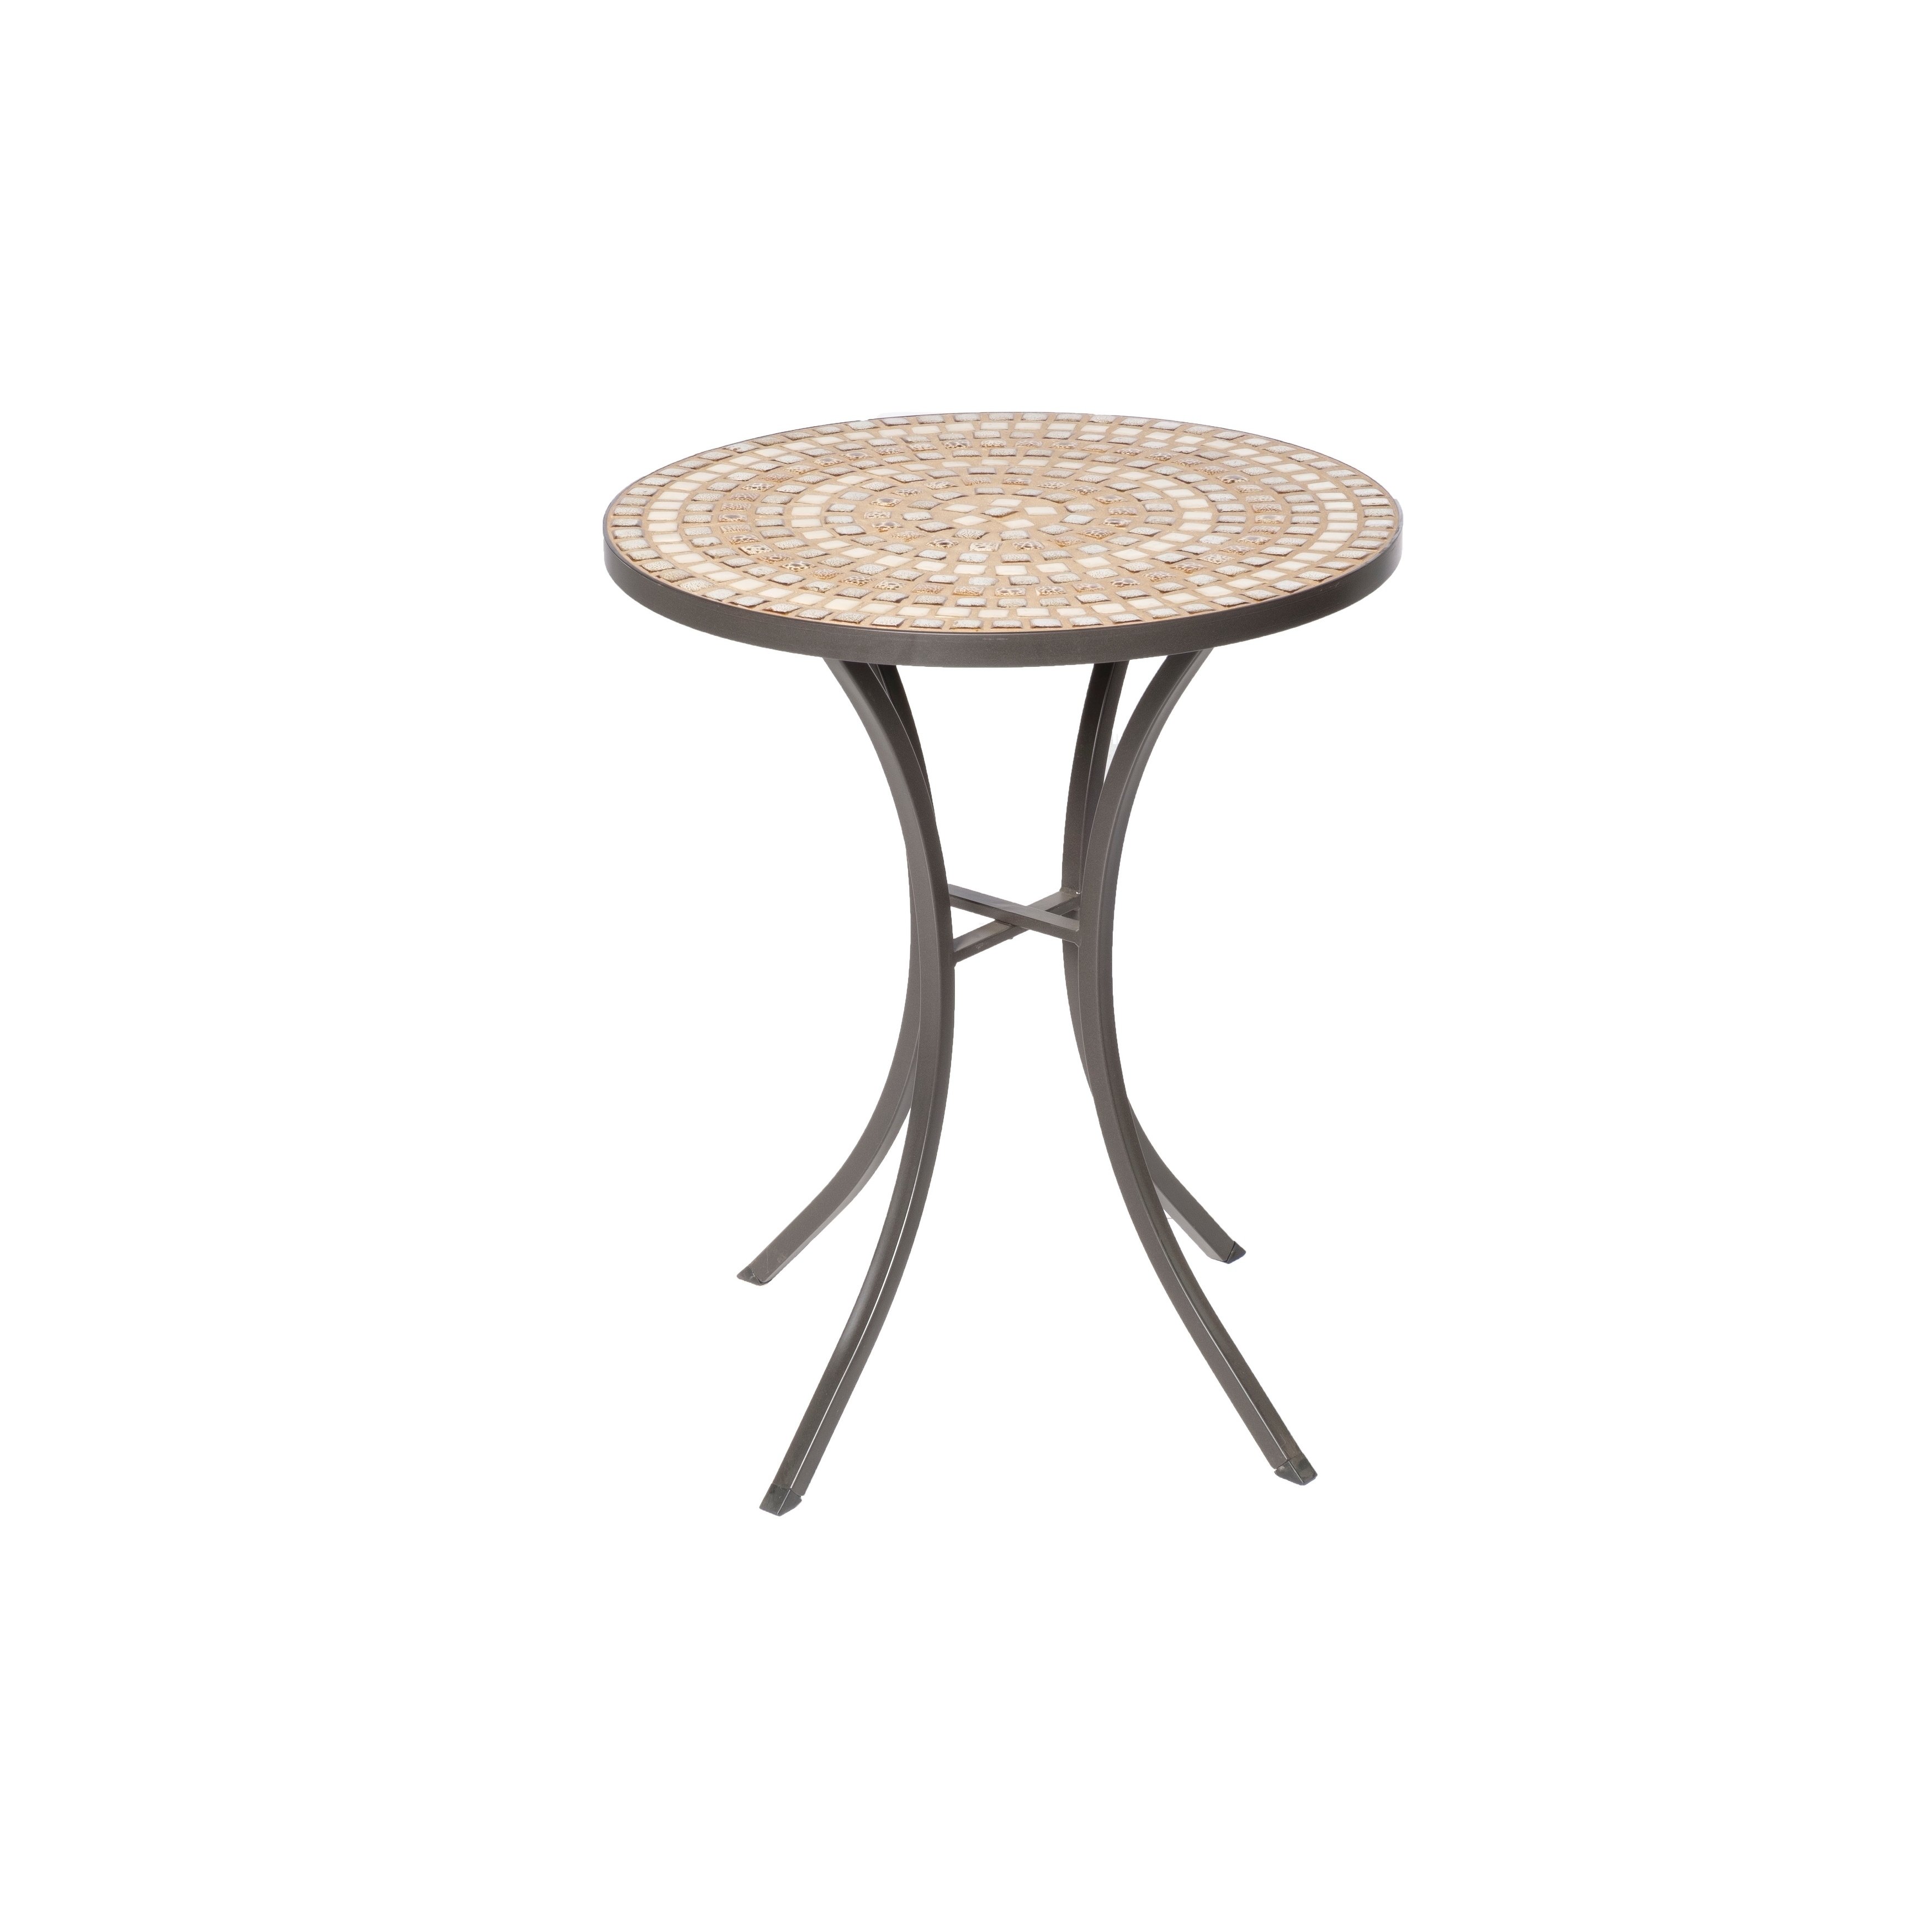 boracay beige ceramic and wrought iron inch round mosaic outdoor side table with tile top base free shipping today protector cover espresso wood end tables linen runner large